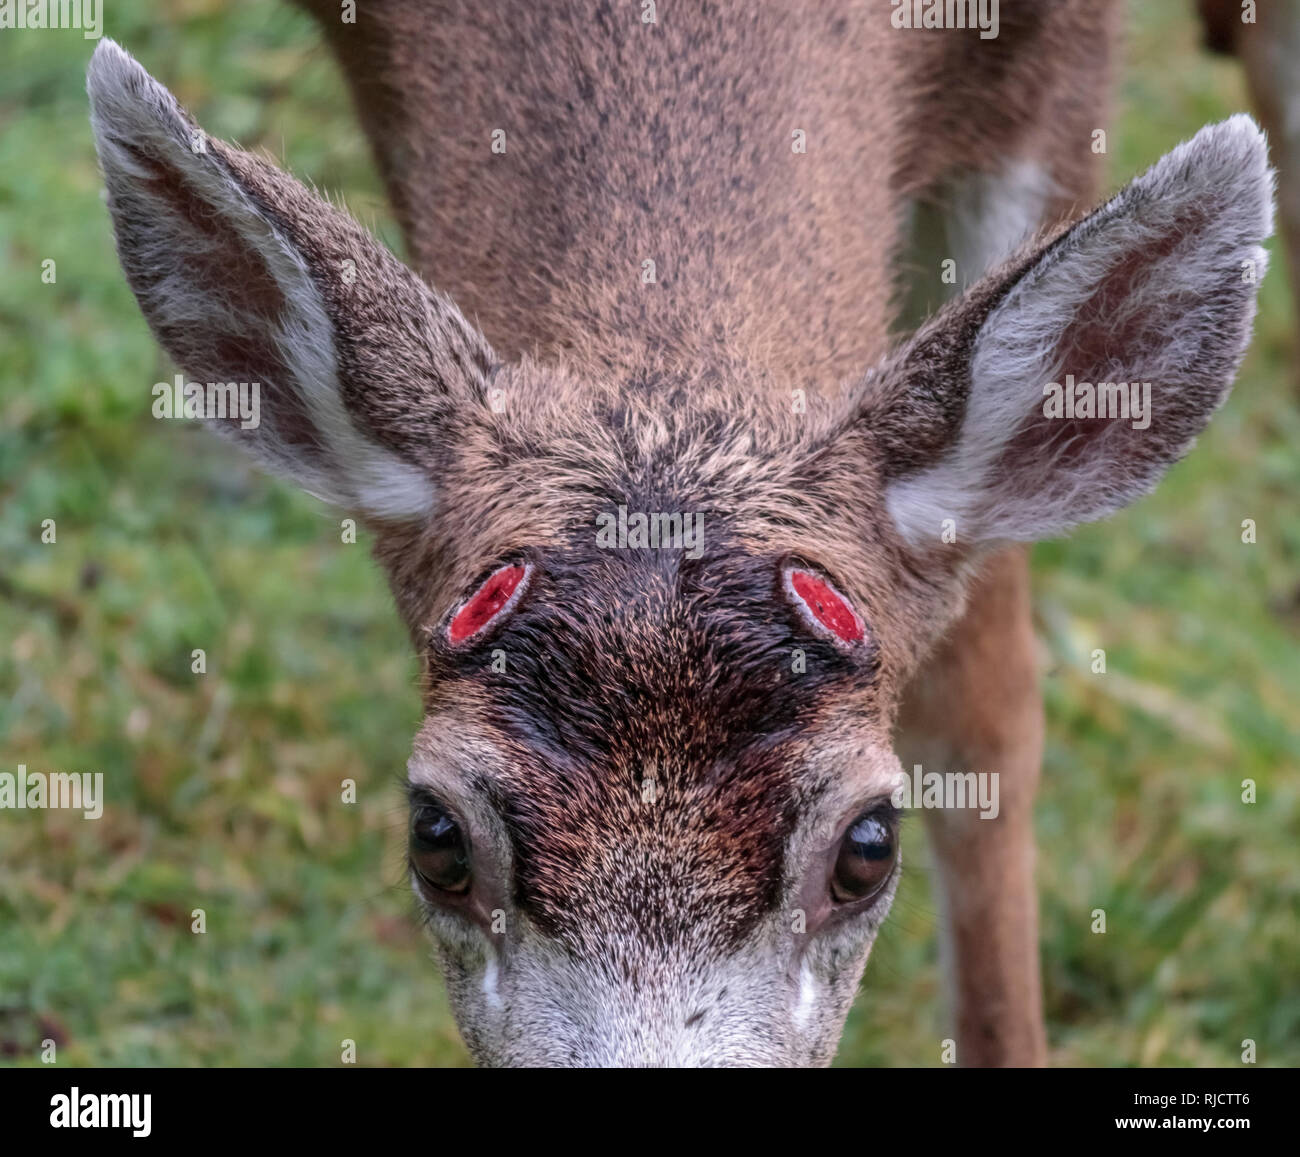 Close view of a male deer, looking up at the camera, who has just shed his antlers, revealing two bloody red pedicles (mounting points) on his head. Stock Photo